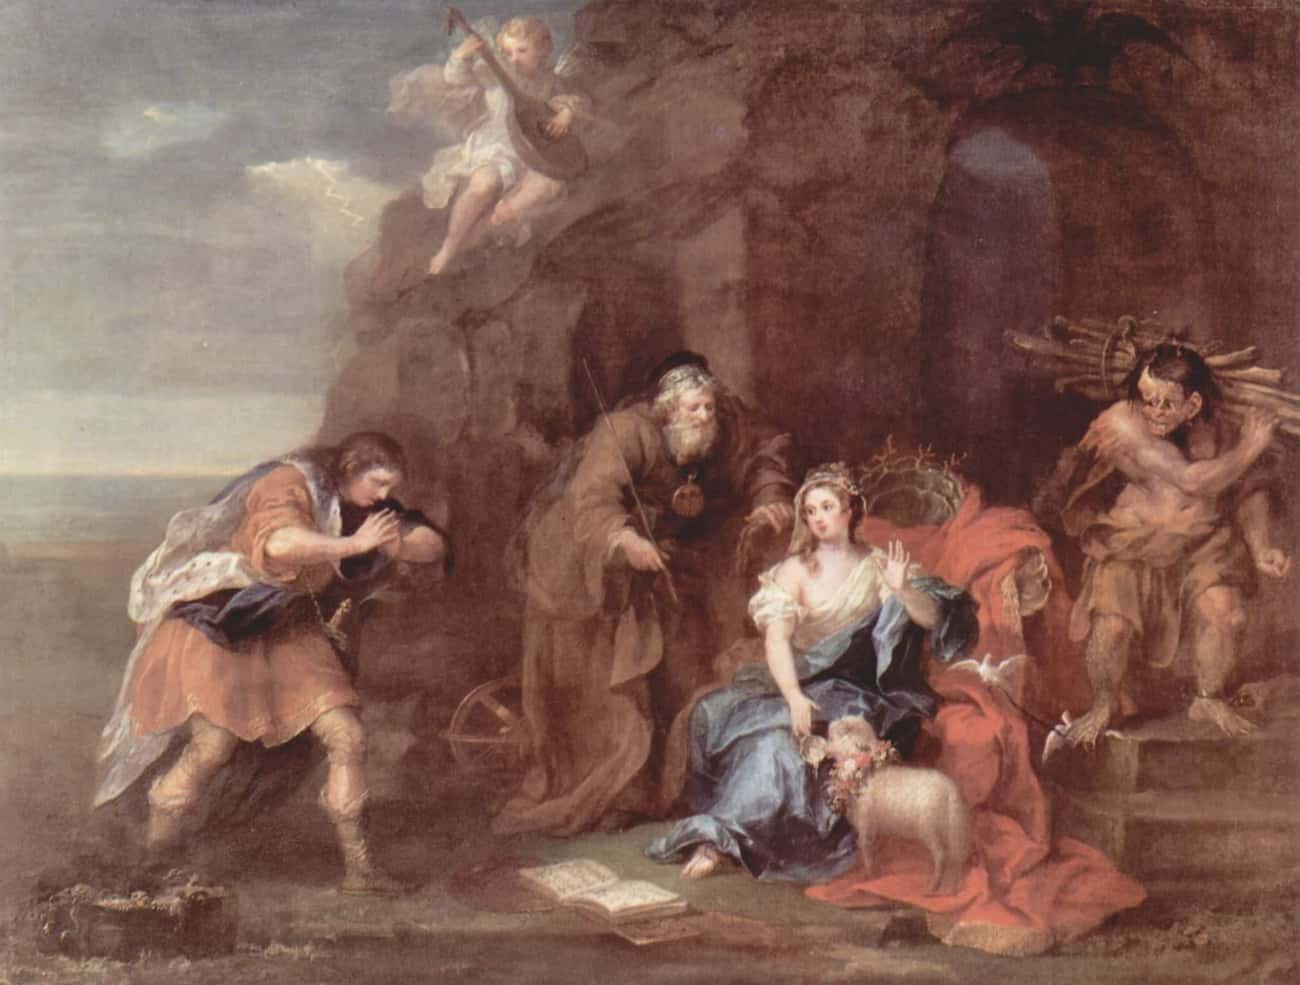 Scene from Shakespeare's The Tempest